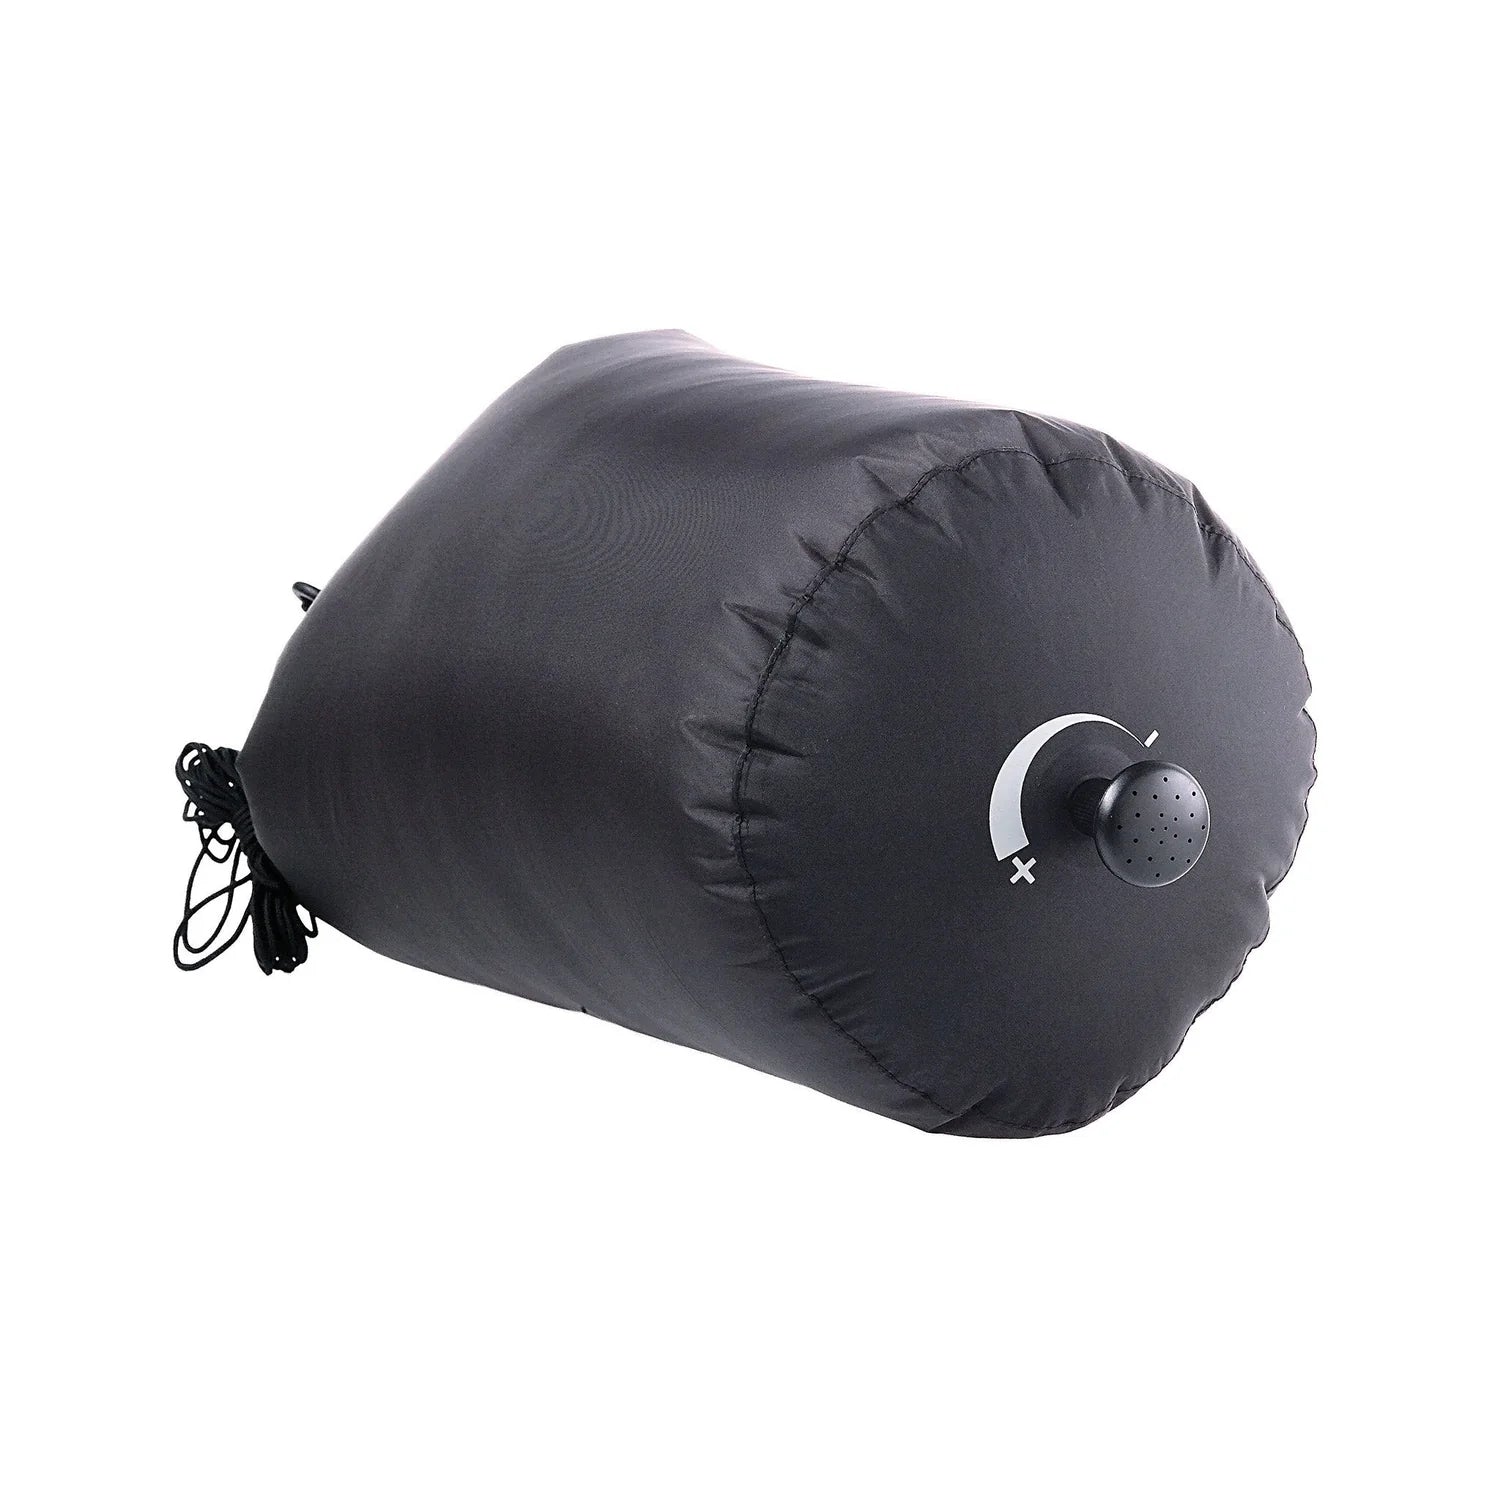 Sea to Summit Pocket Shower 10L Camping-Dusche